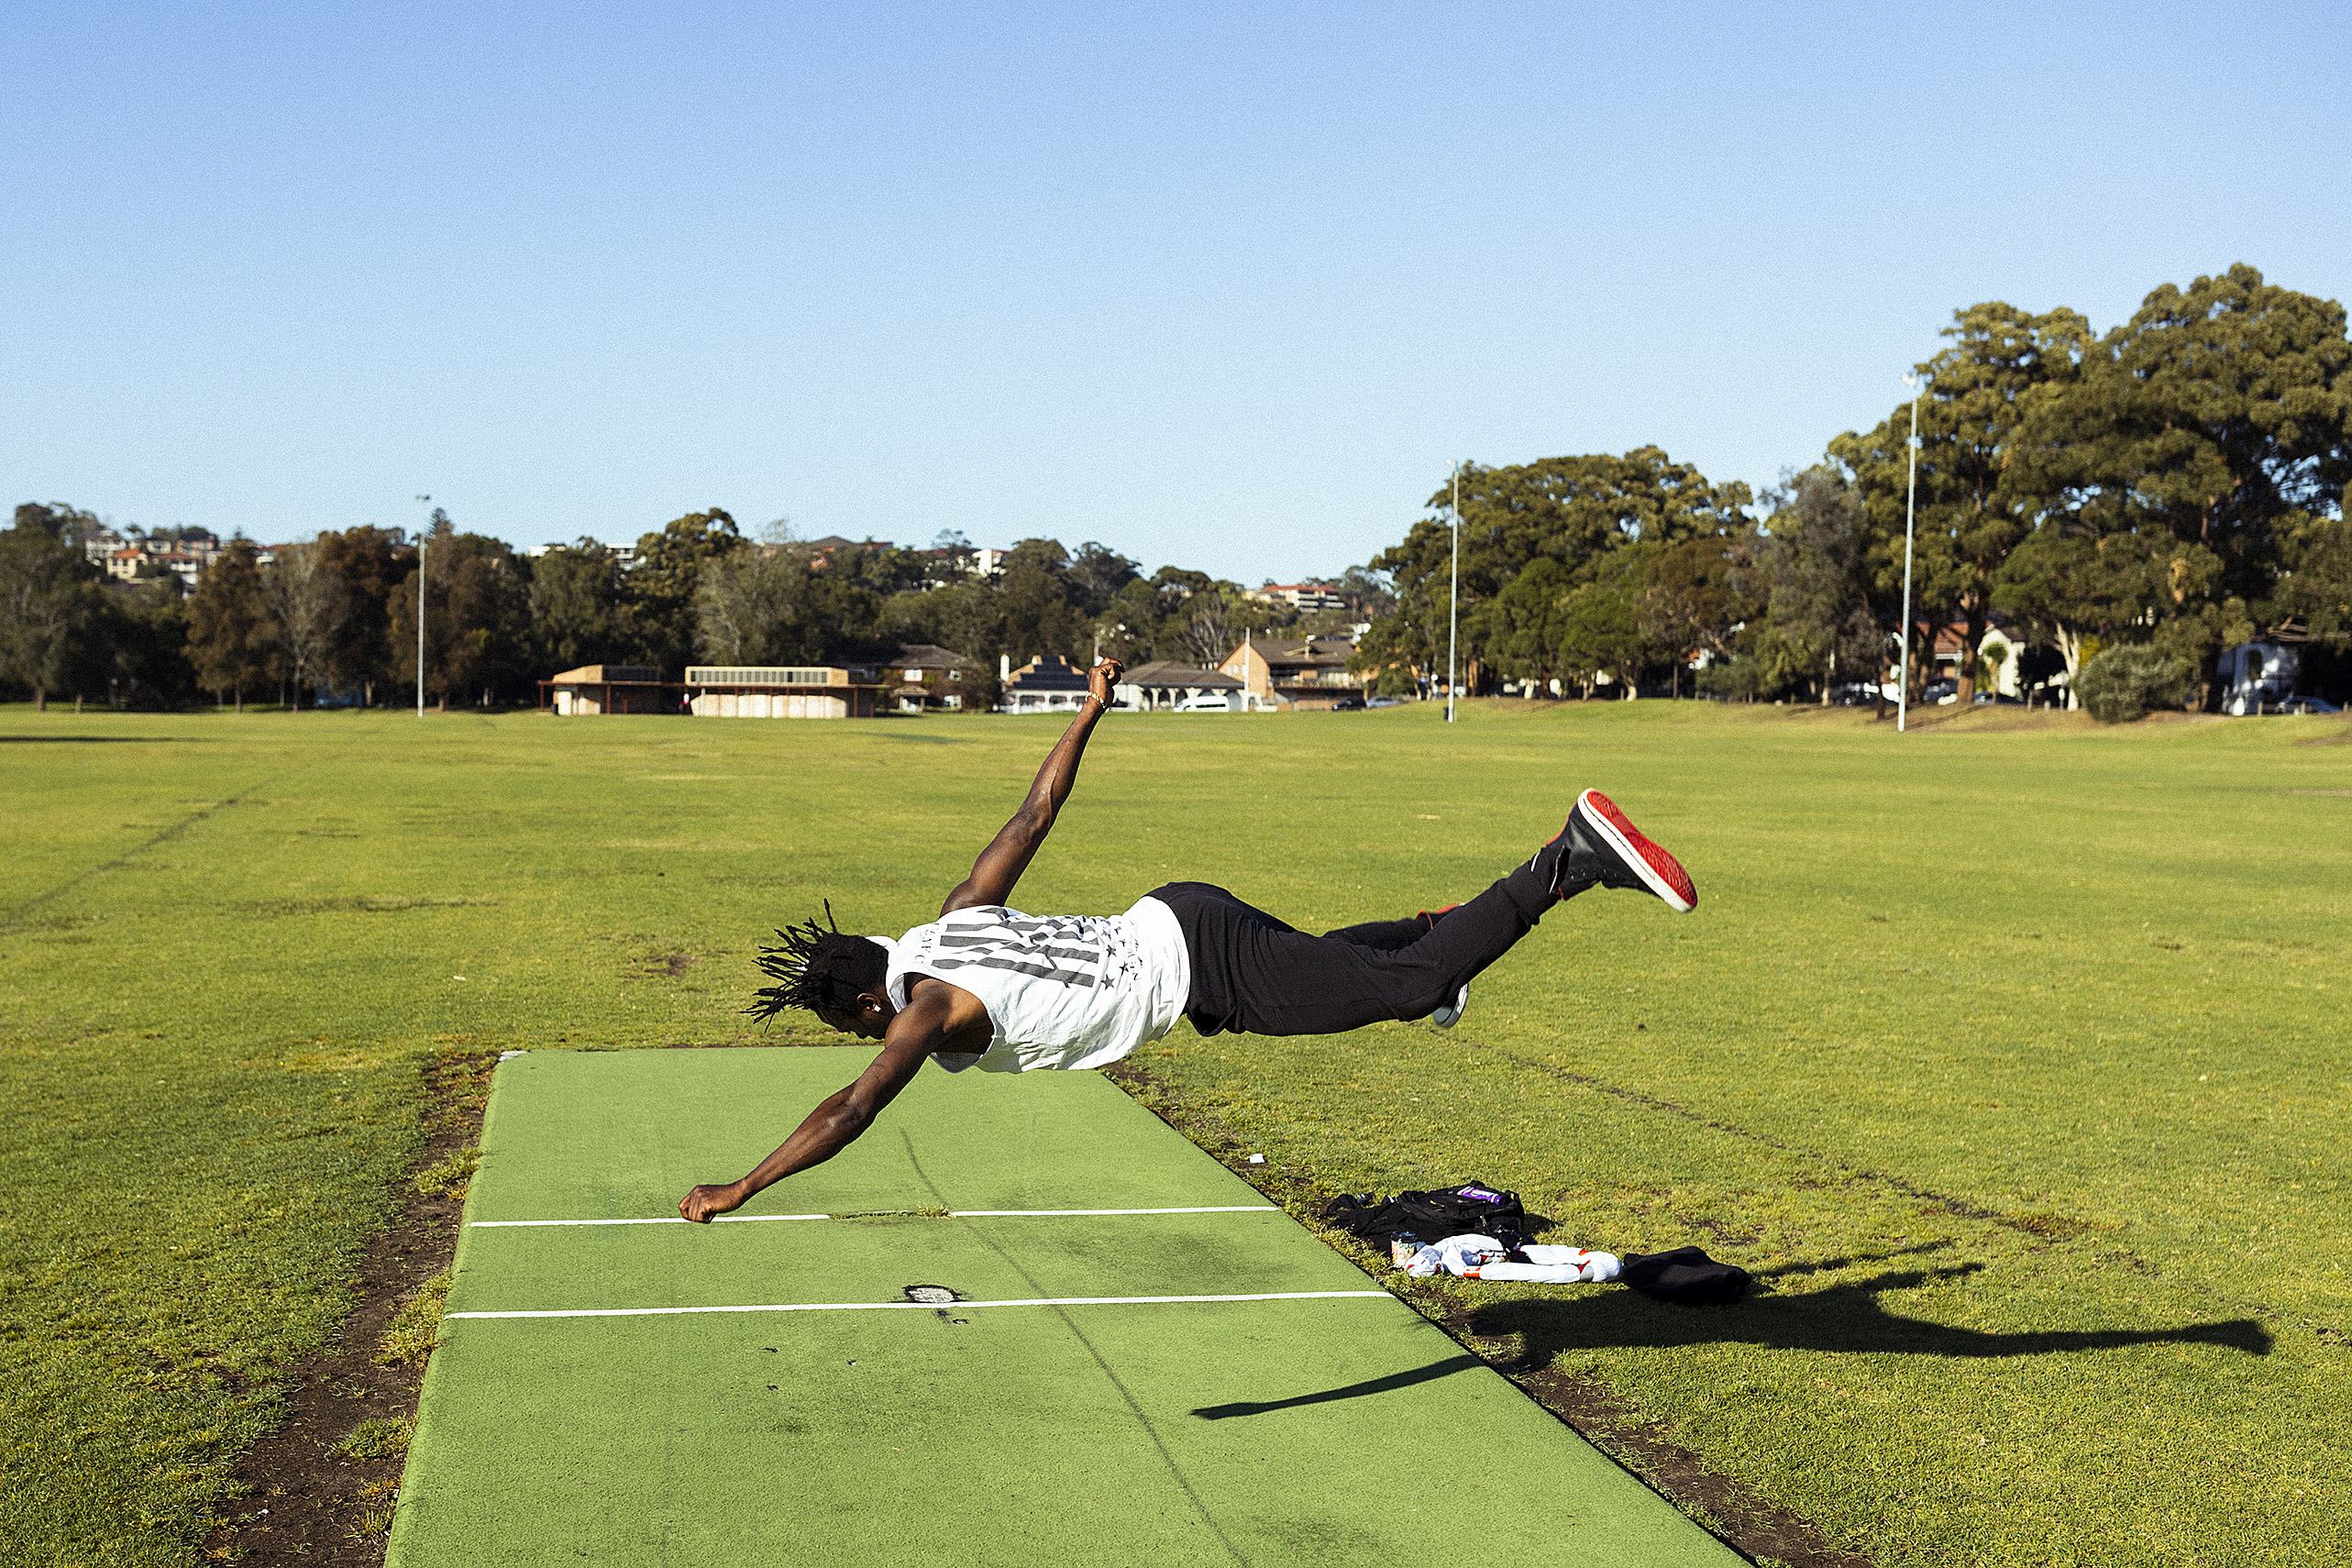 Dancer and choreographer Lucky Lartey dances on a cricket pitch at Beaman Park in Earlwood during a COVID-19 lockdown in Sydney  in September 2021. Photo by Dominic Lorrimer